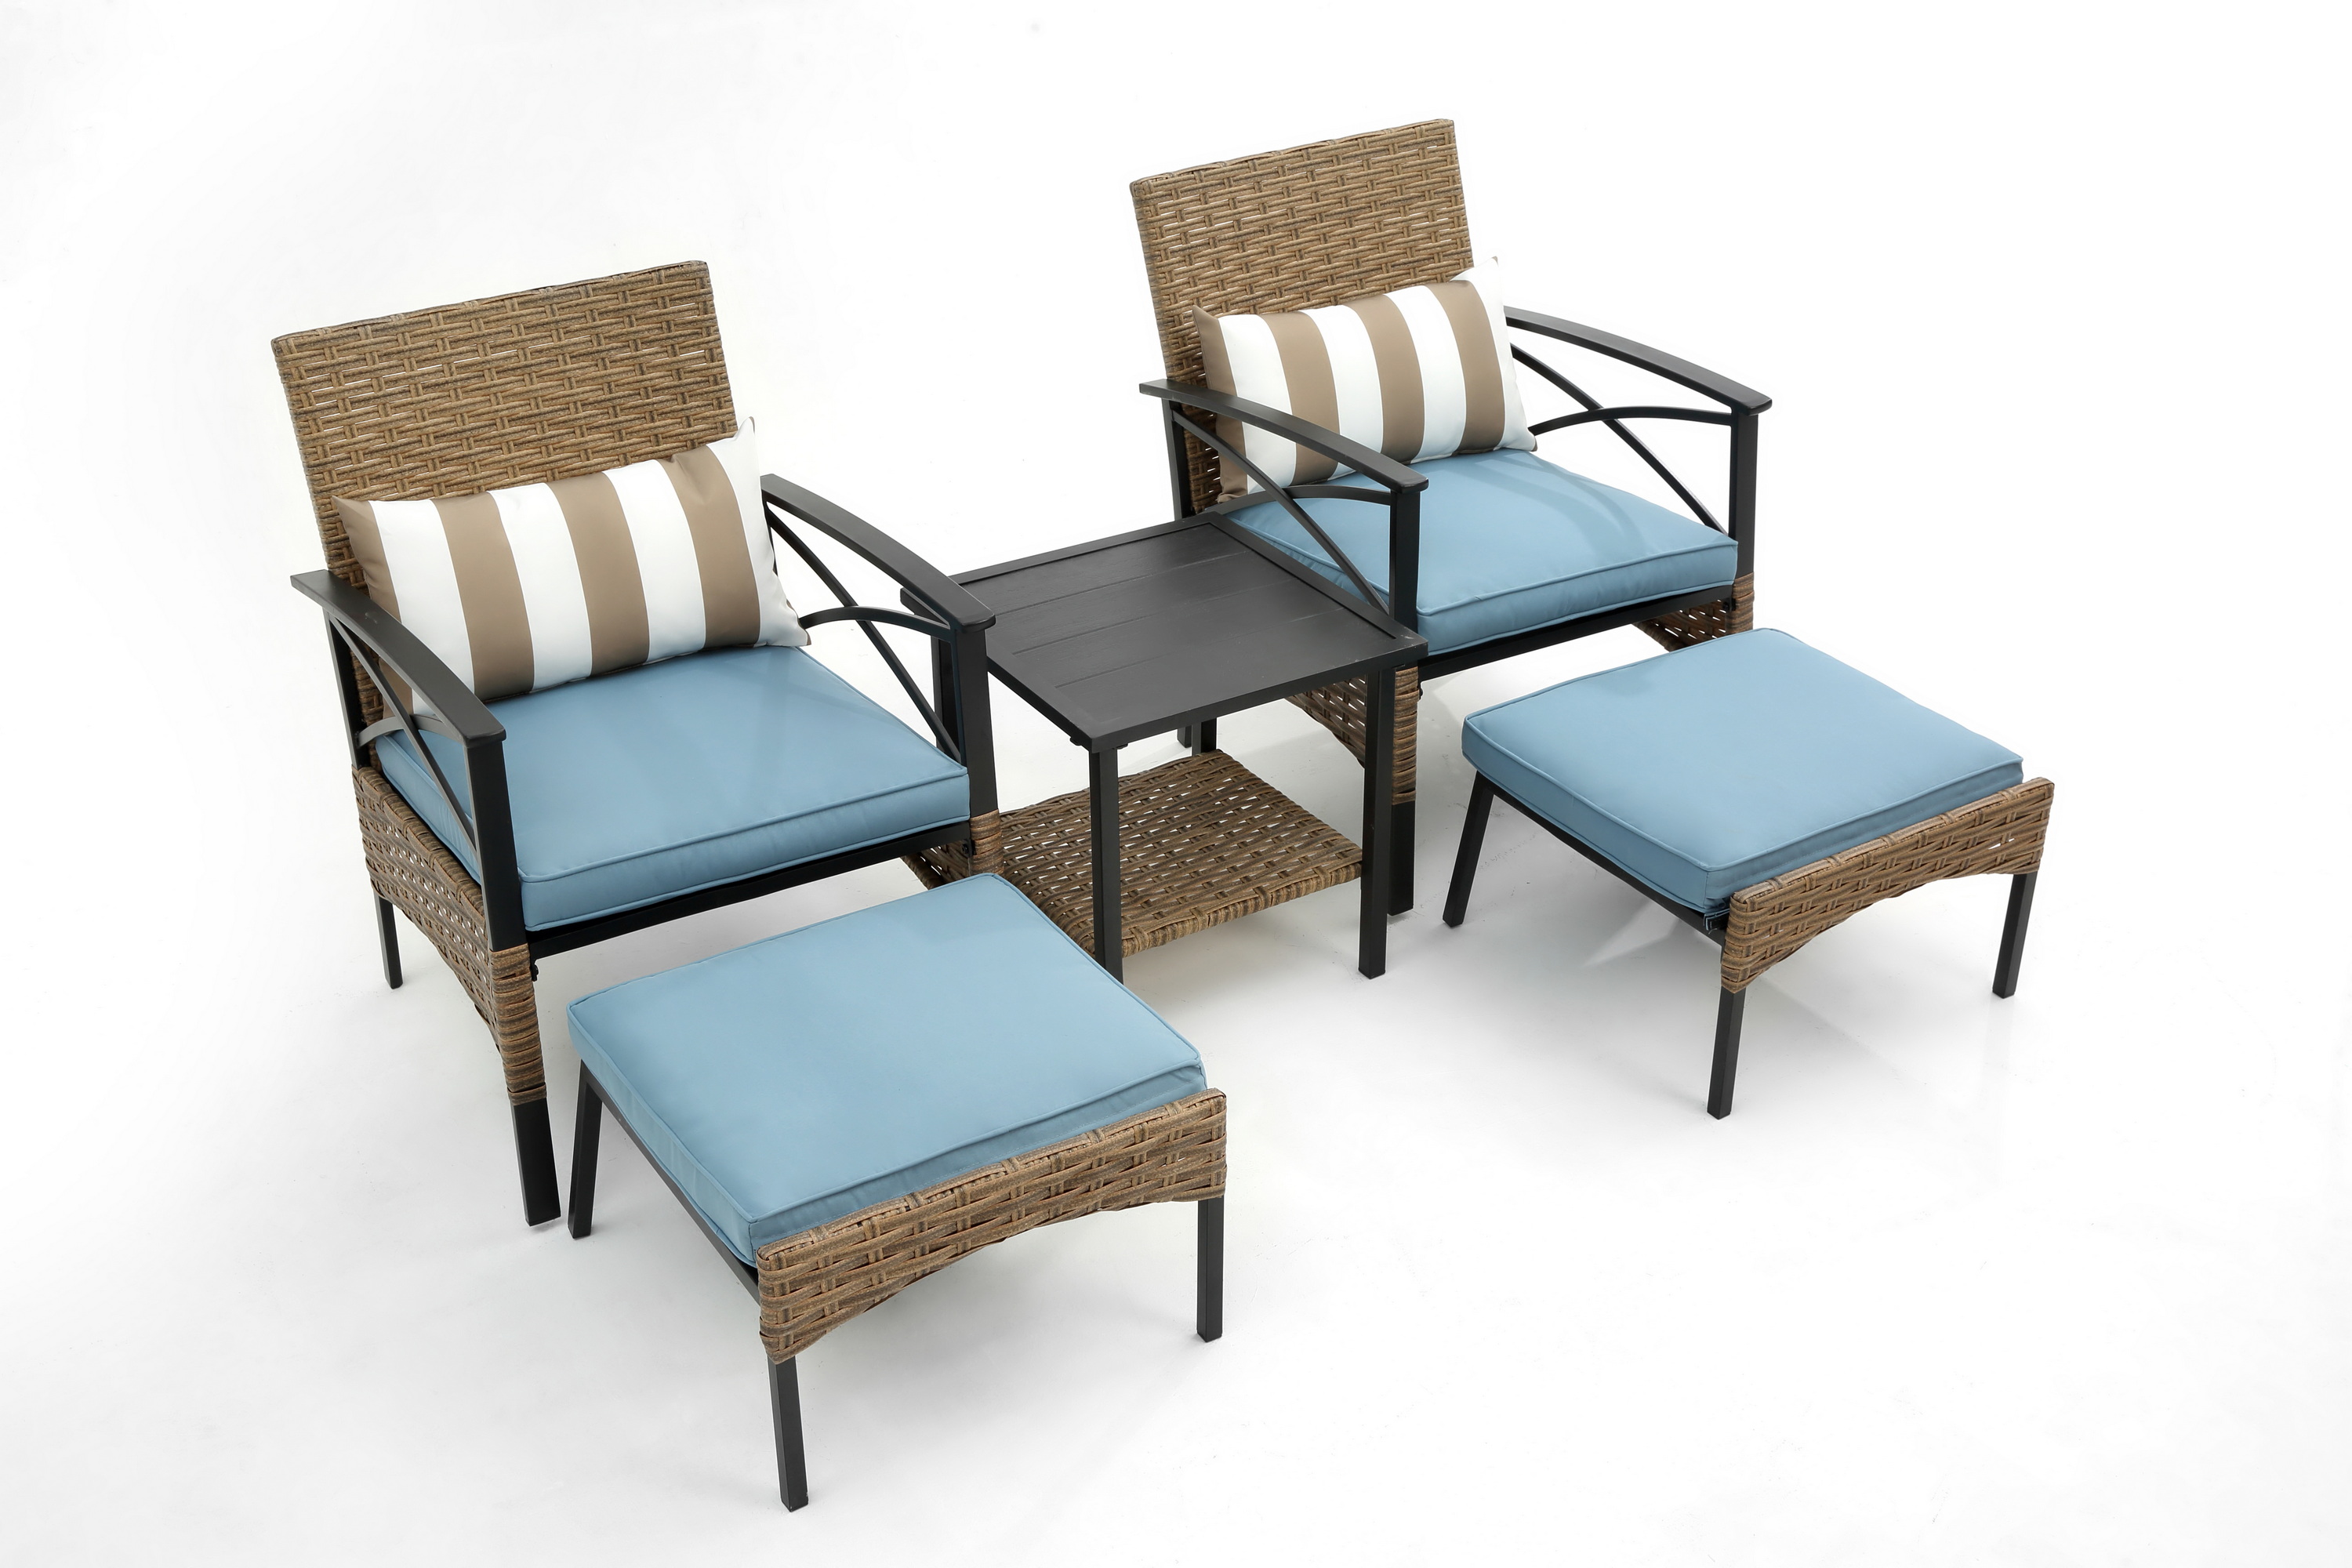 Luccalily Wicker Rattan 5 Pieces Sofa Set, Leisure Chairs with Thick Soft Cushion Set,Pool Lounge Chair Outdoor Patio Furniture Set - image 3 of 11